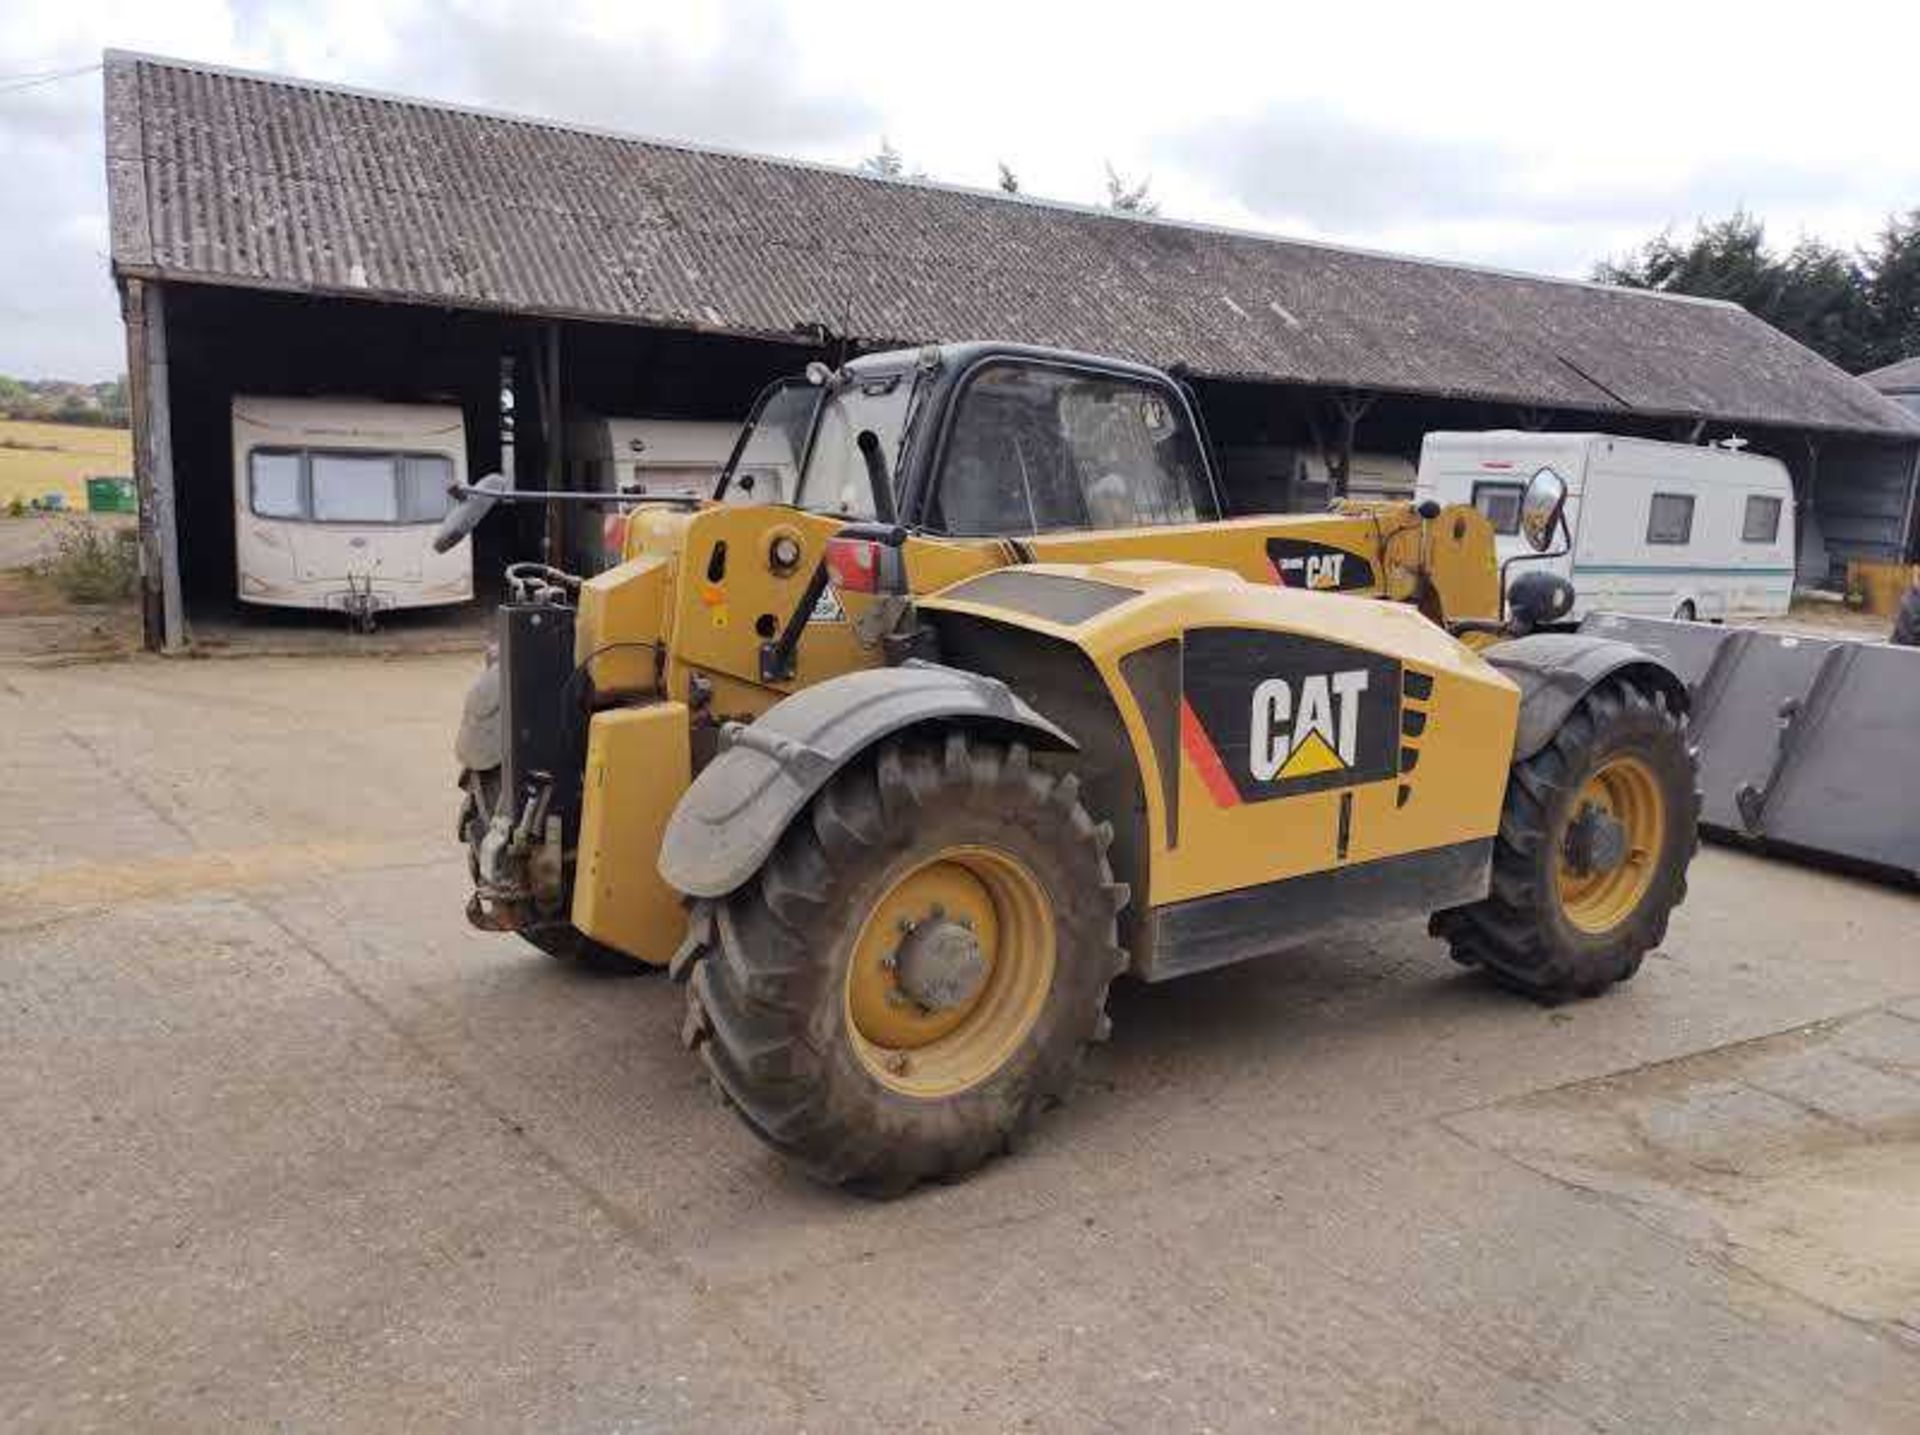 Cat Teleporter TH 406 (Year 2010) 5706 hours. Well serviced in good condition. 4m reach. Reg: AE10 - Image 3 of 7